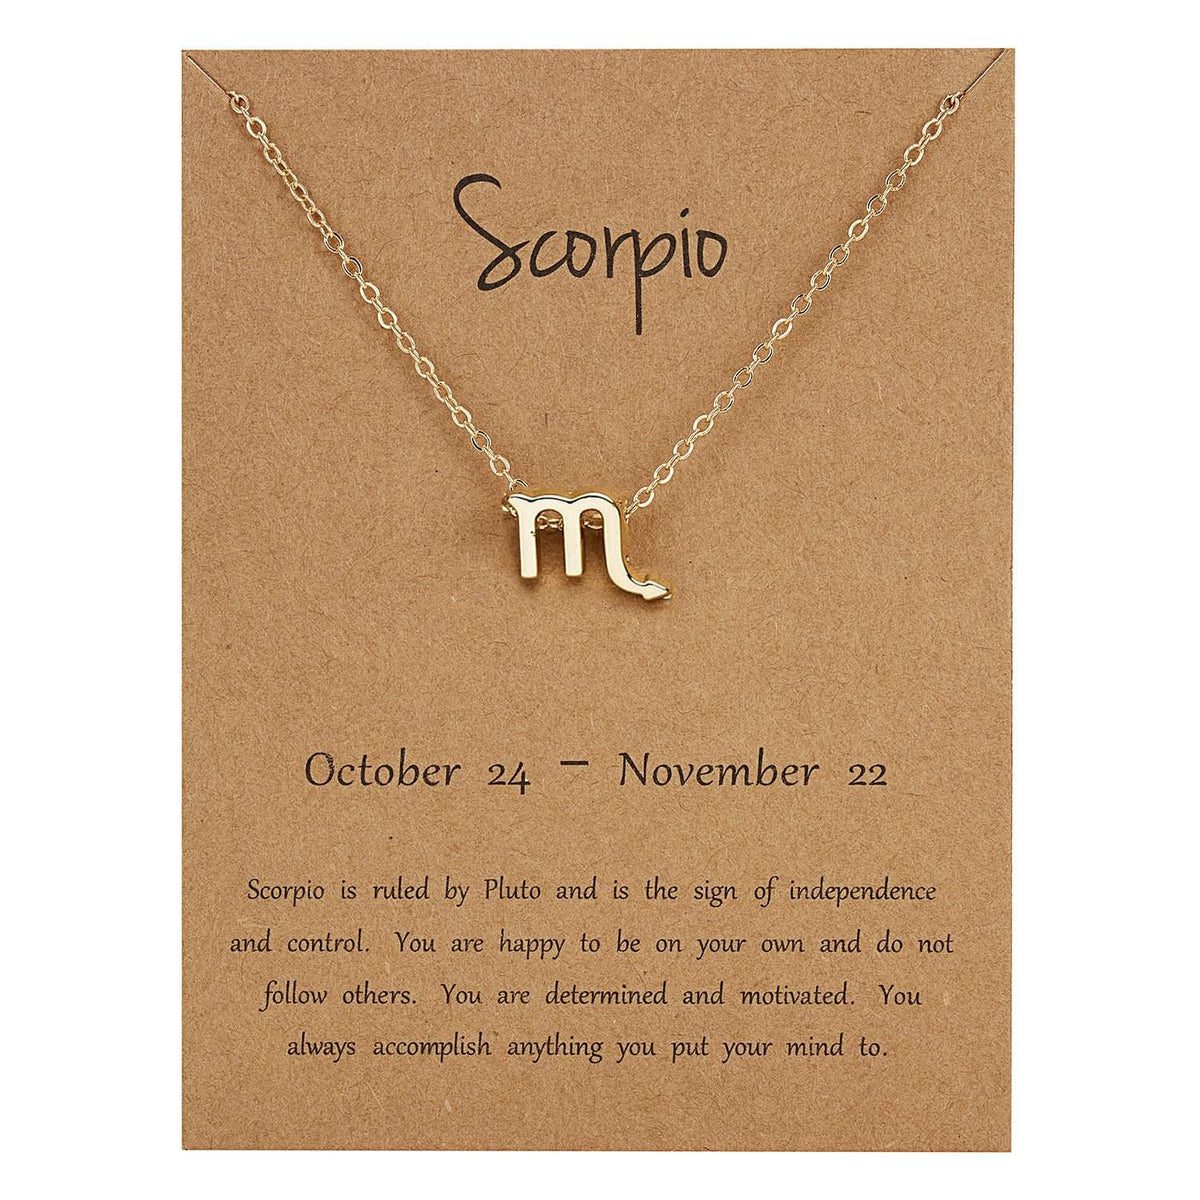 Scorpio- Hermah Gold Plated Zodiac Sign Pendant Necklace for Women